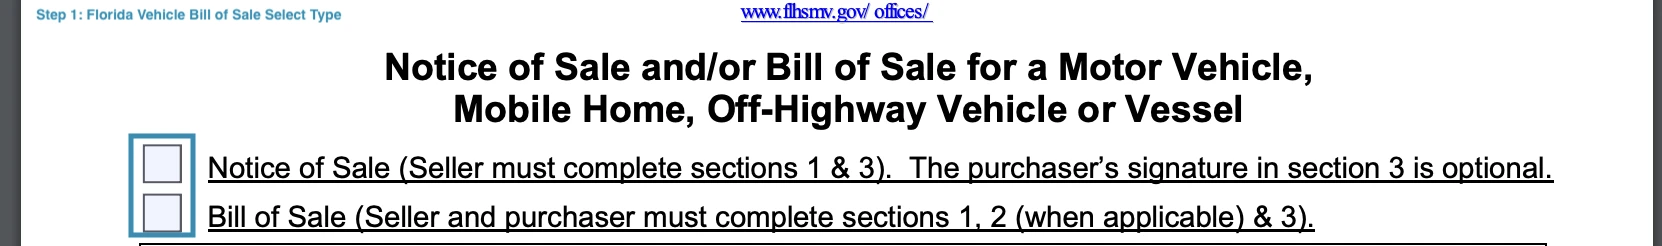 Section for selecting the type of vehicle bill of sale for Florida